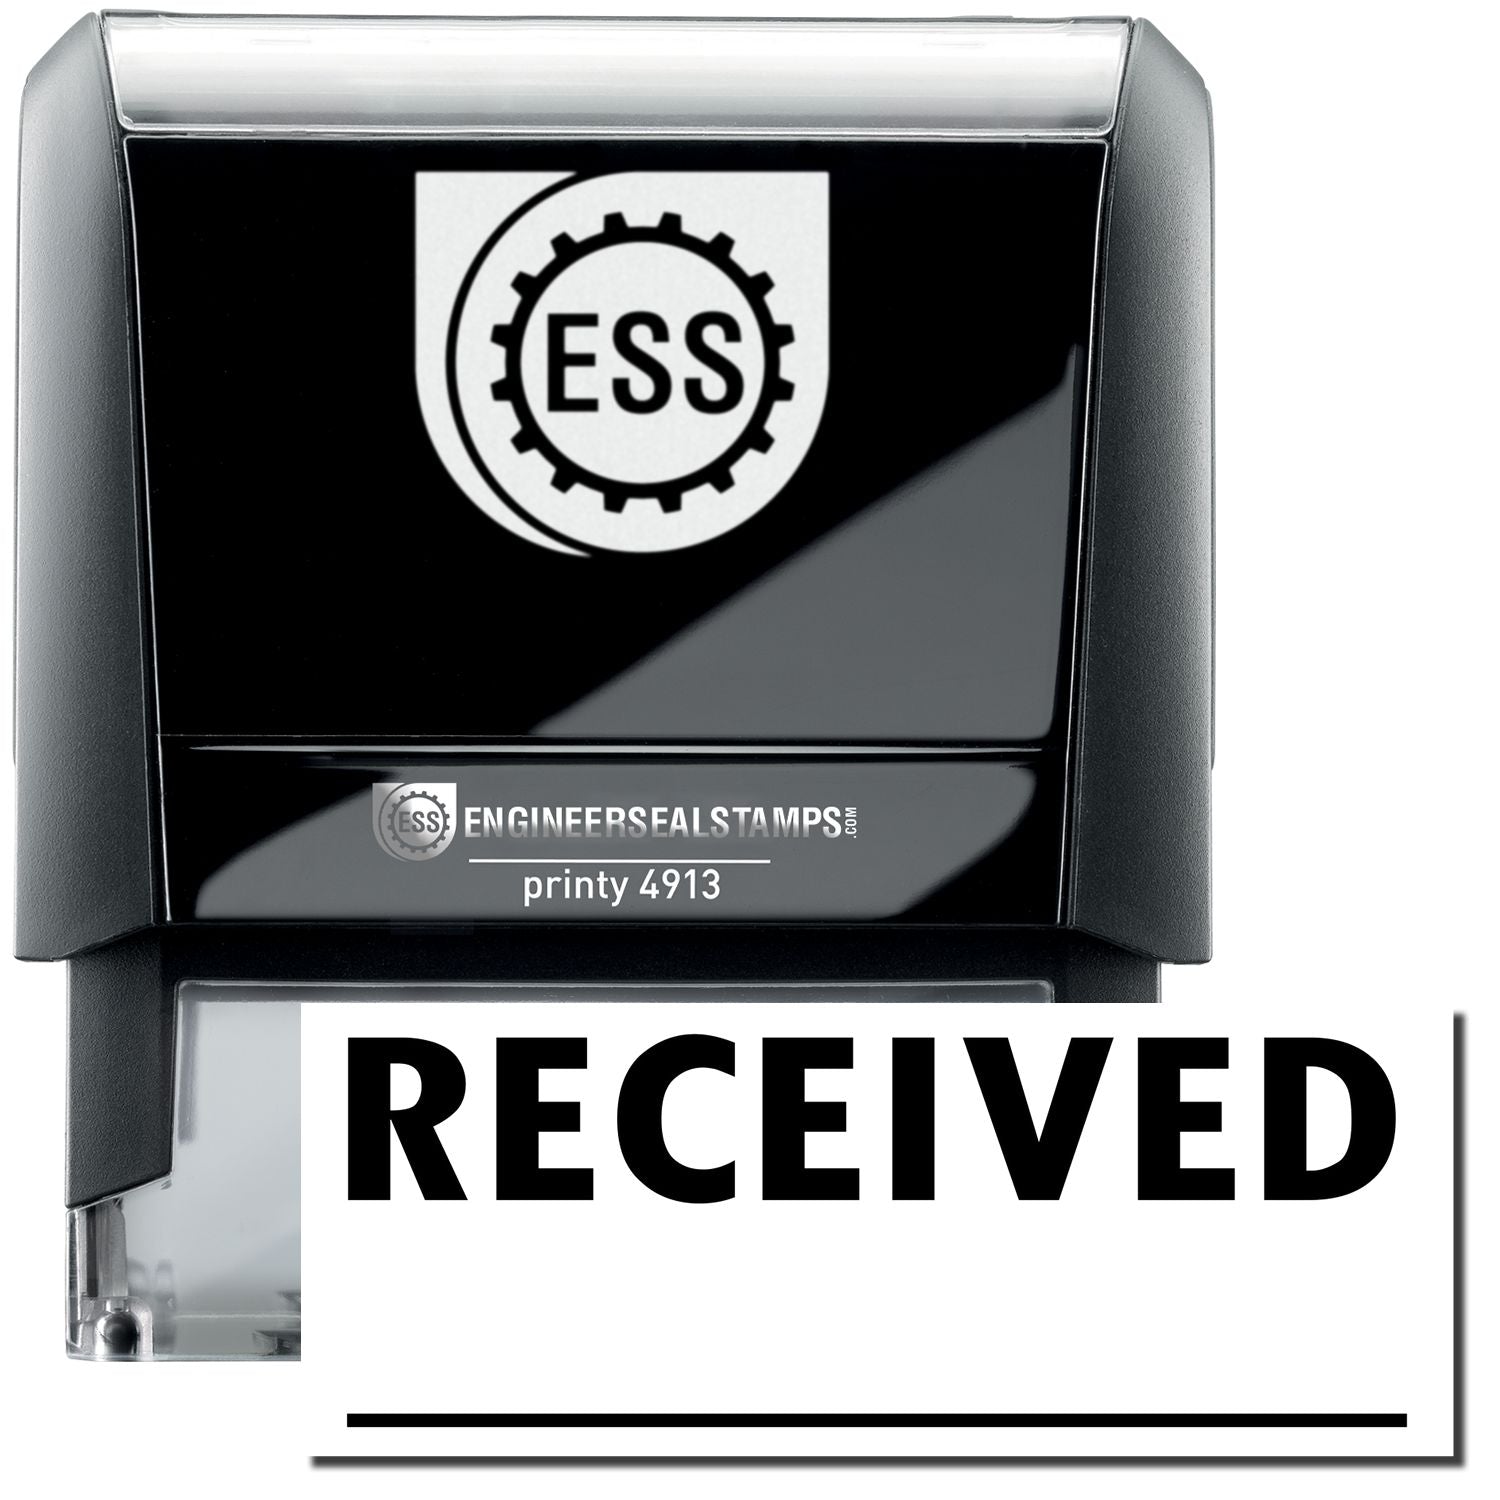 A self-inking stamp with a stamped image showing how the text "RECEIVED" in a large bold font with two lines is displayed by it.